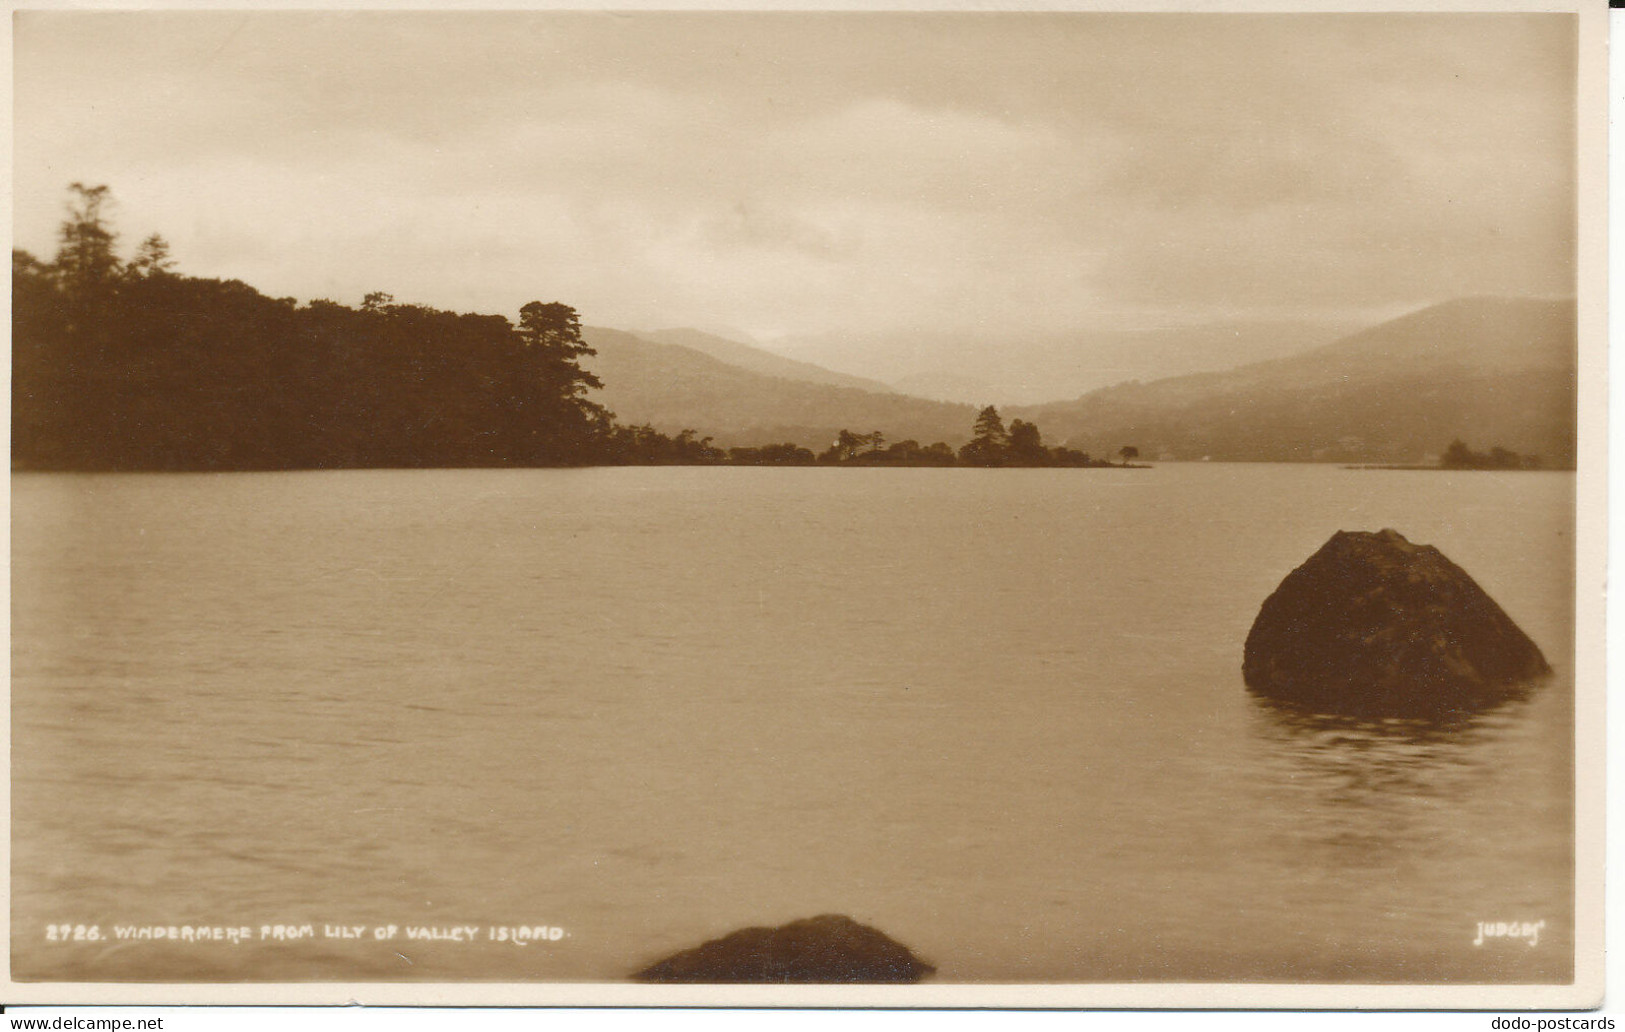 PC34812 Windermere From Lily Of Valley Island. Judges Ltd. No 2726. RP - Monde